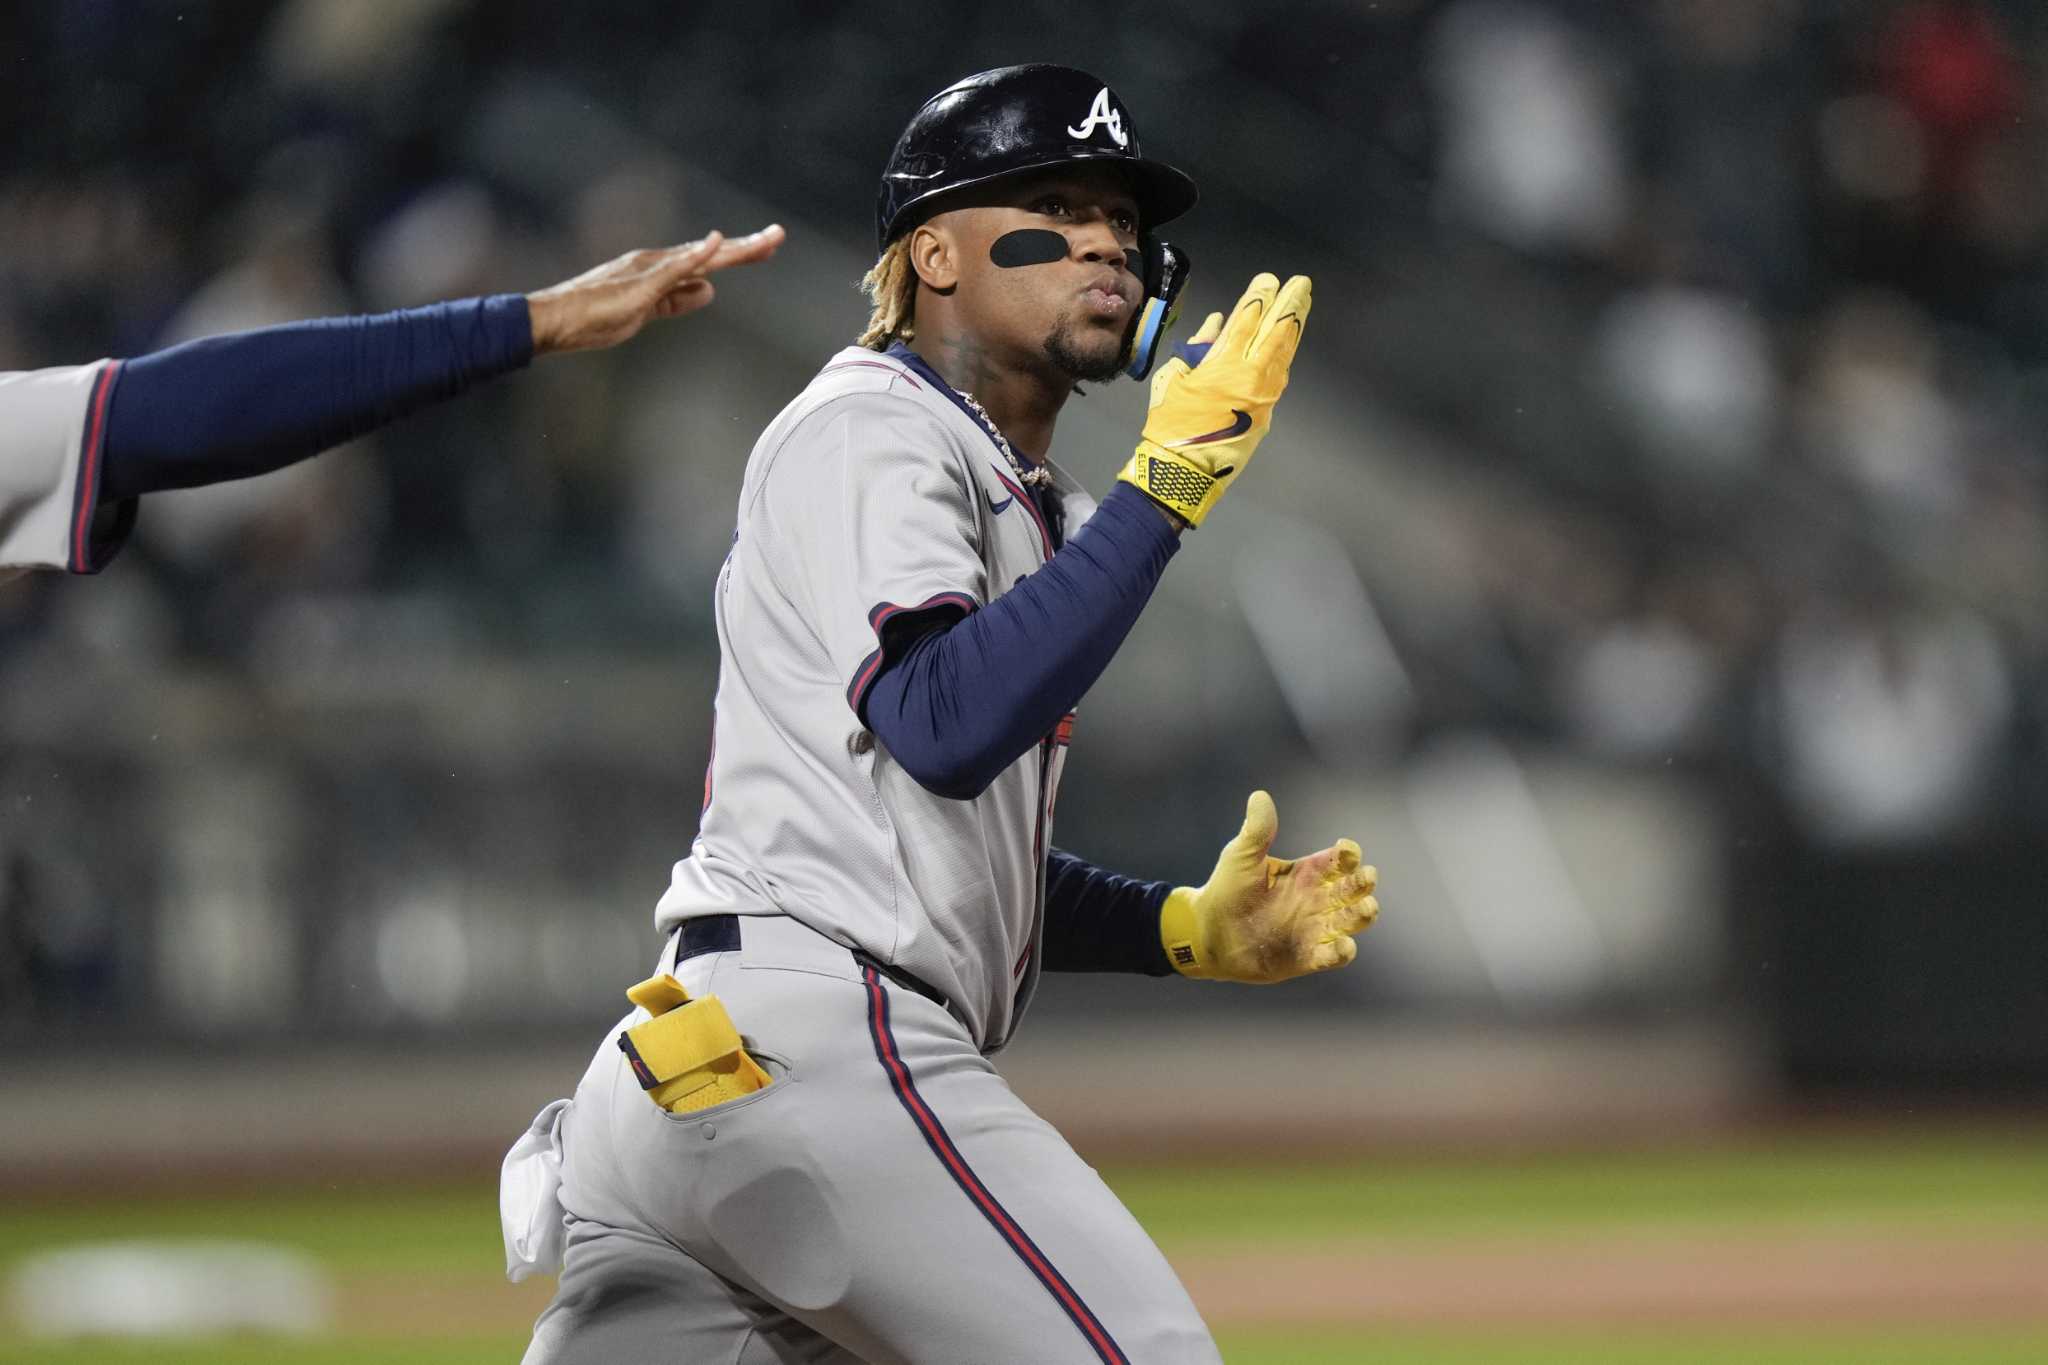 Homers by Acuña, Albies and Olson in 3rd lead Morton and Braves to 4-2 win over Mets